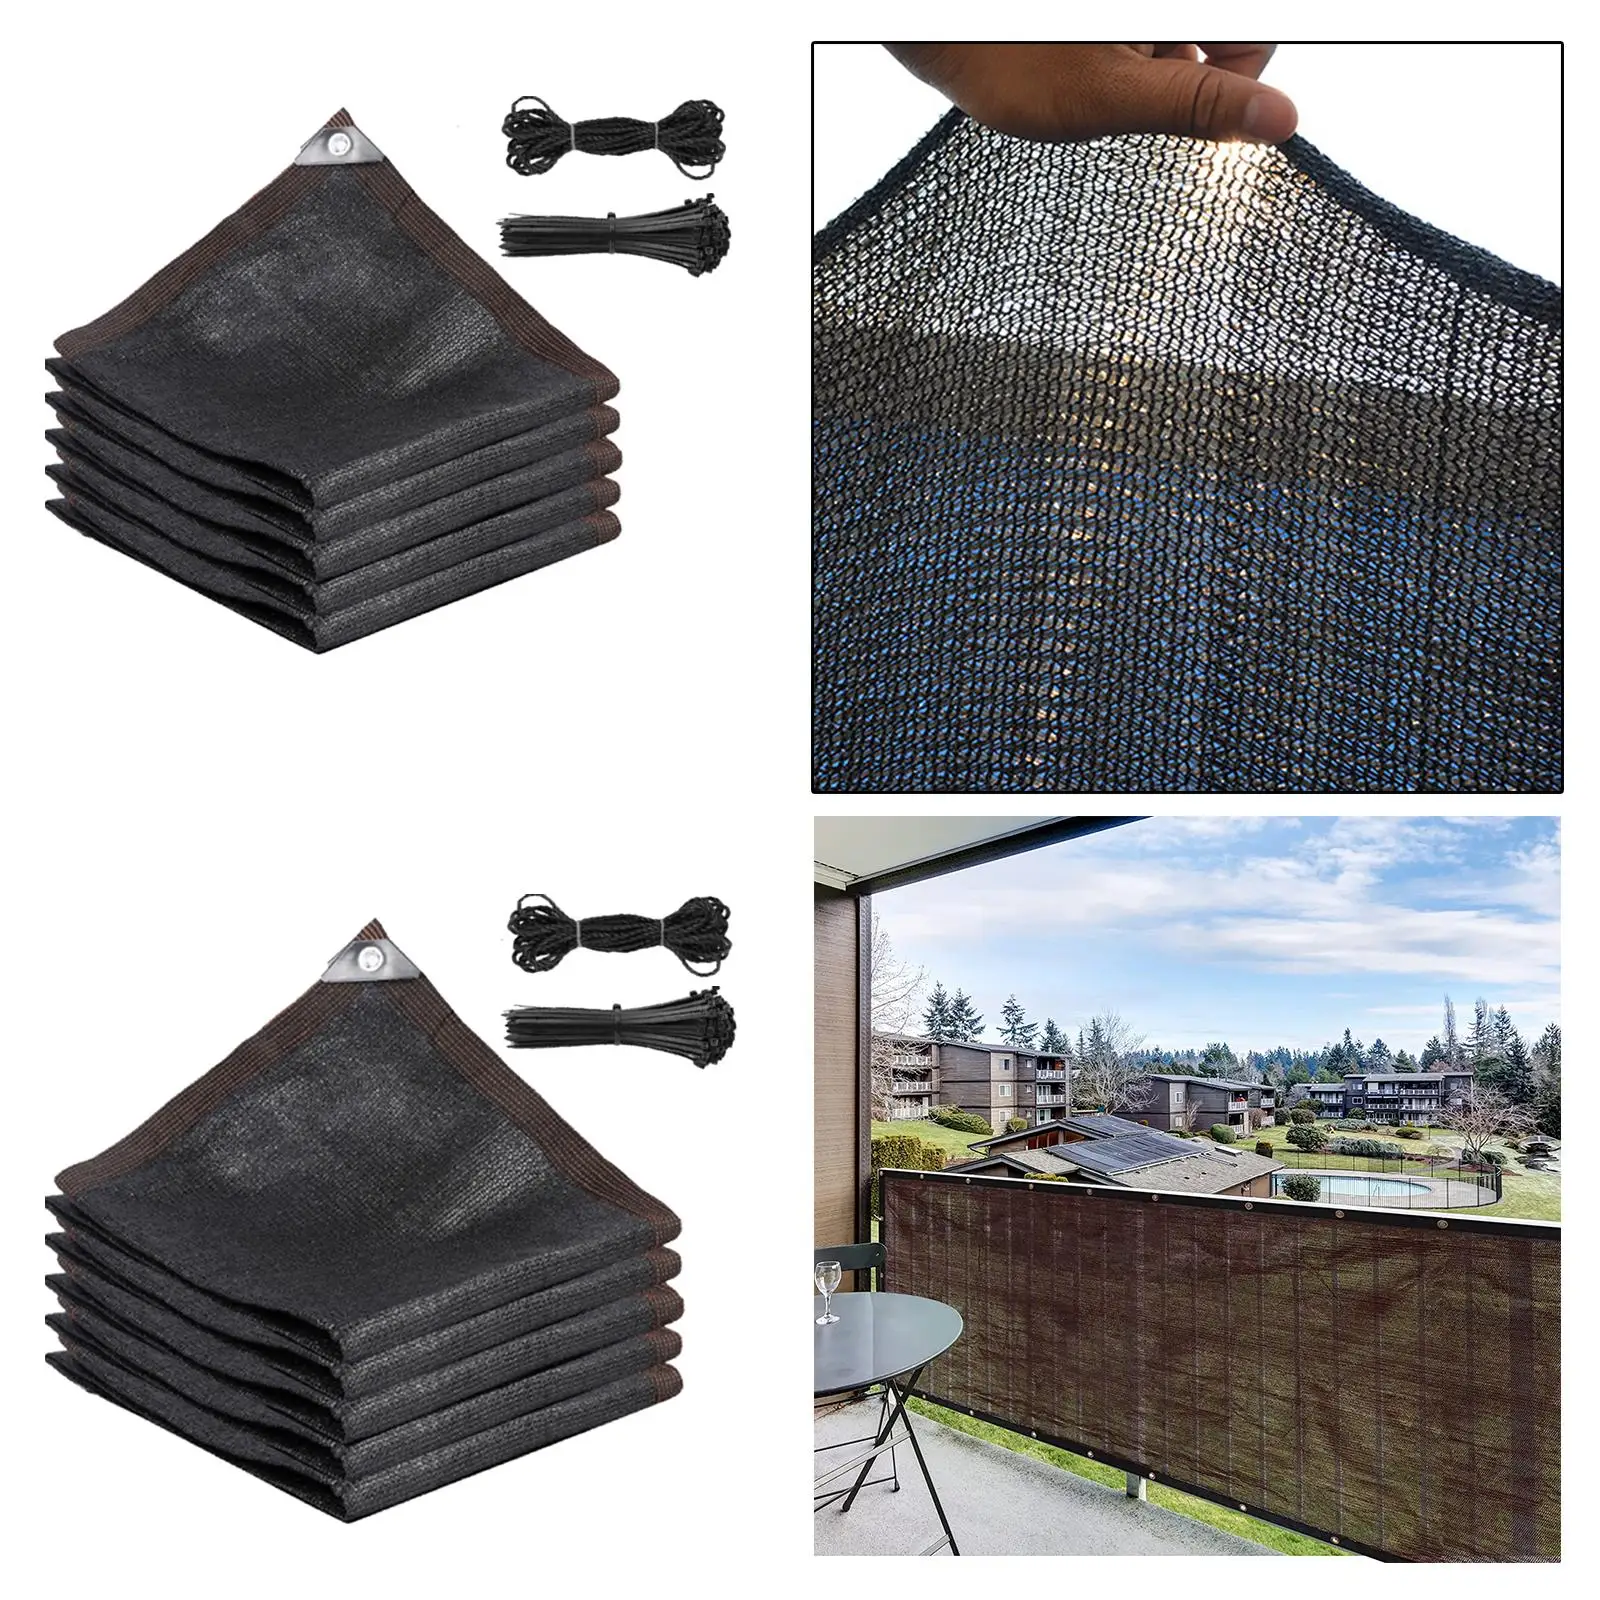 Shade Cloth Block Awning Easy to Install Sunblock Shade Cloth for Plants for Greenhouse Window Balcony Plants Growing Backyard